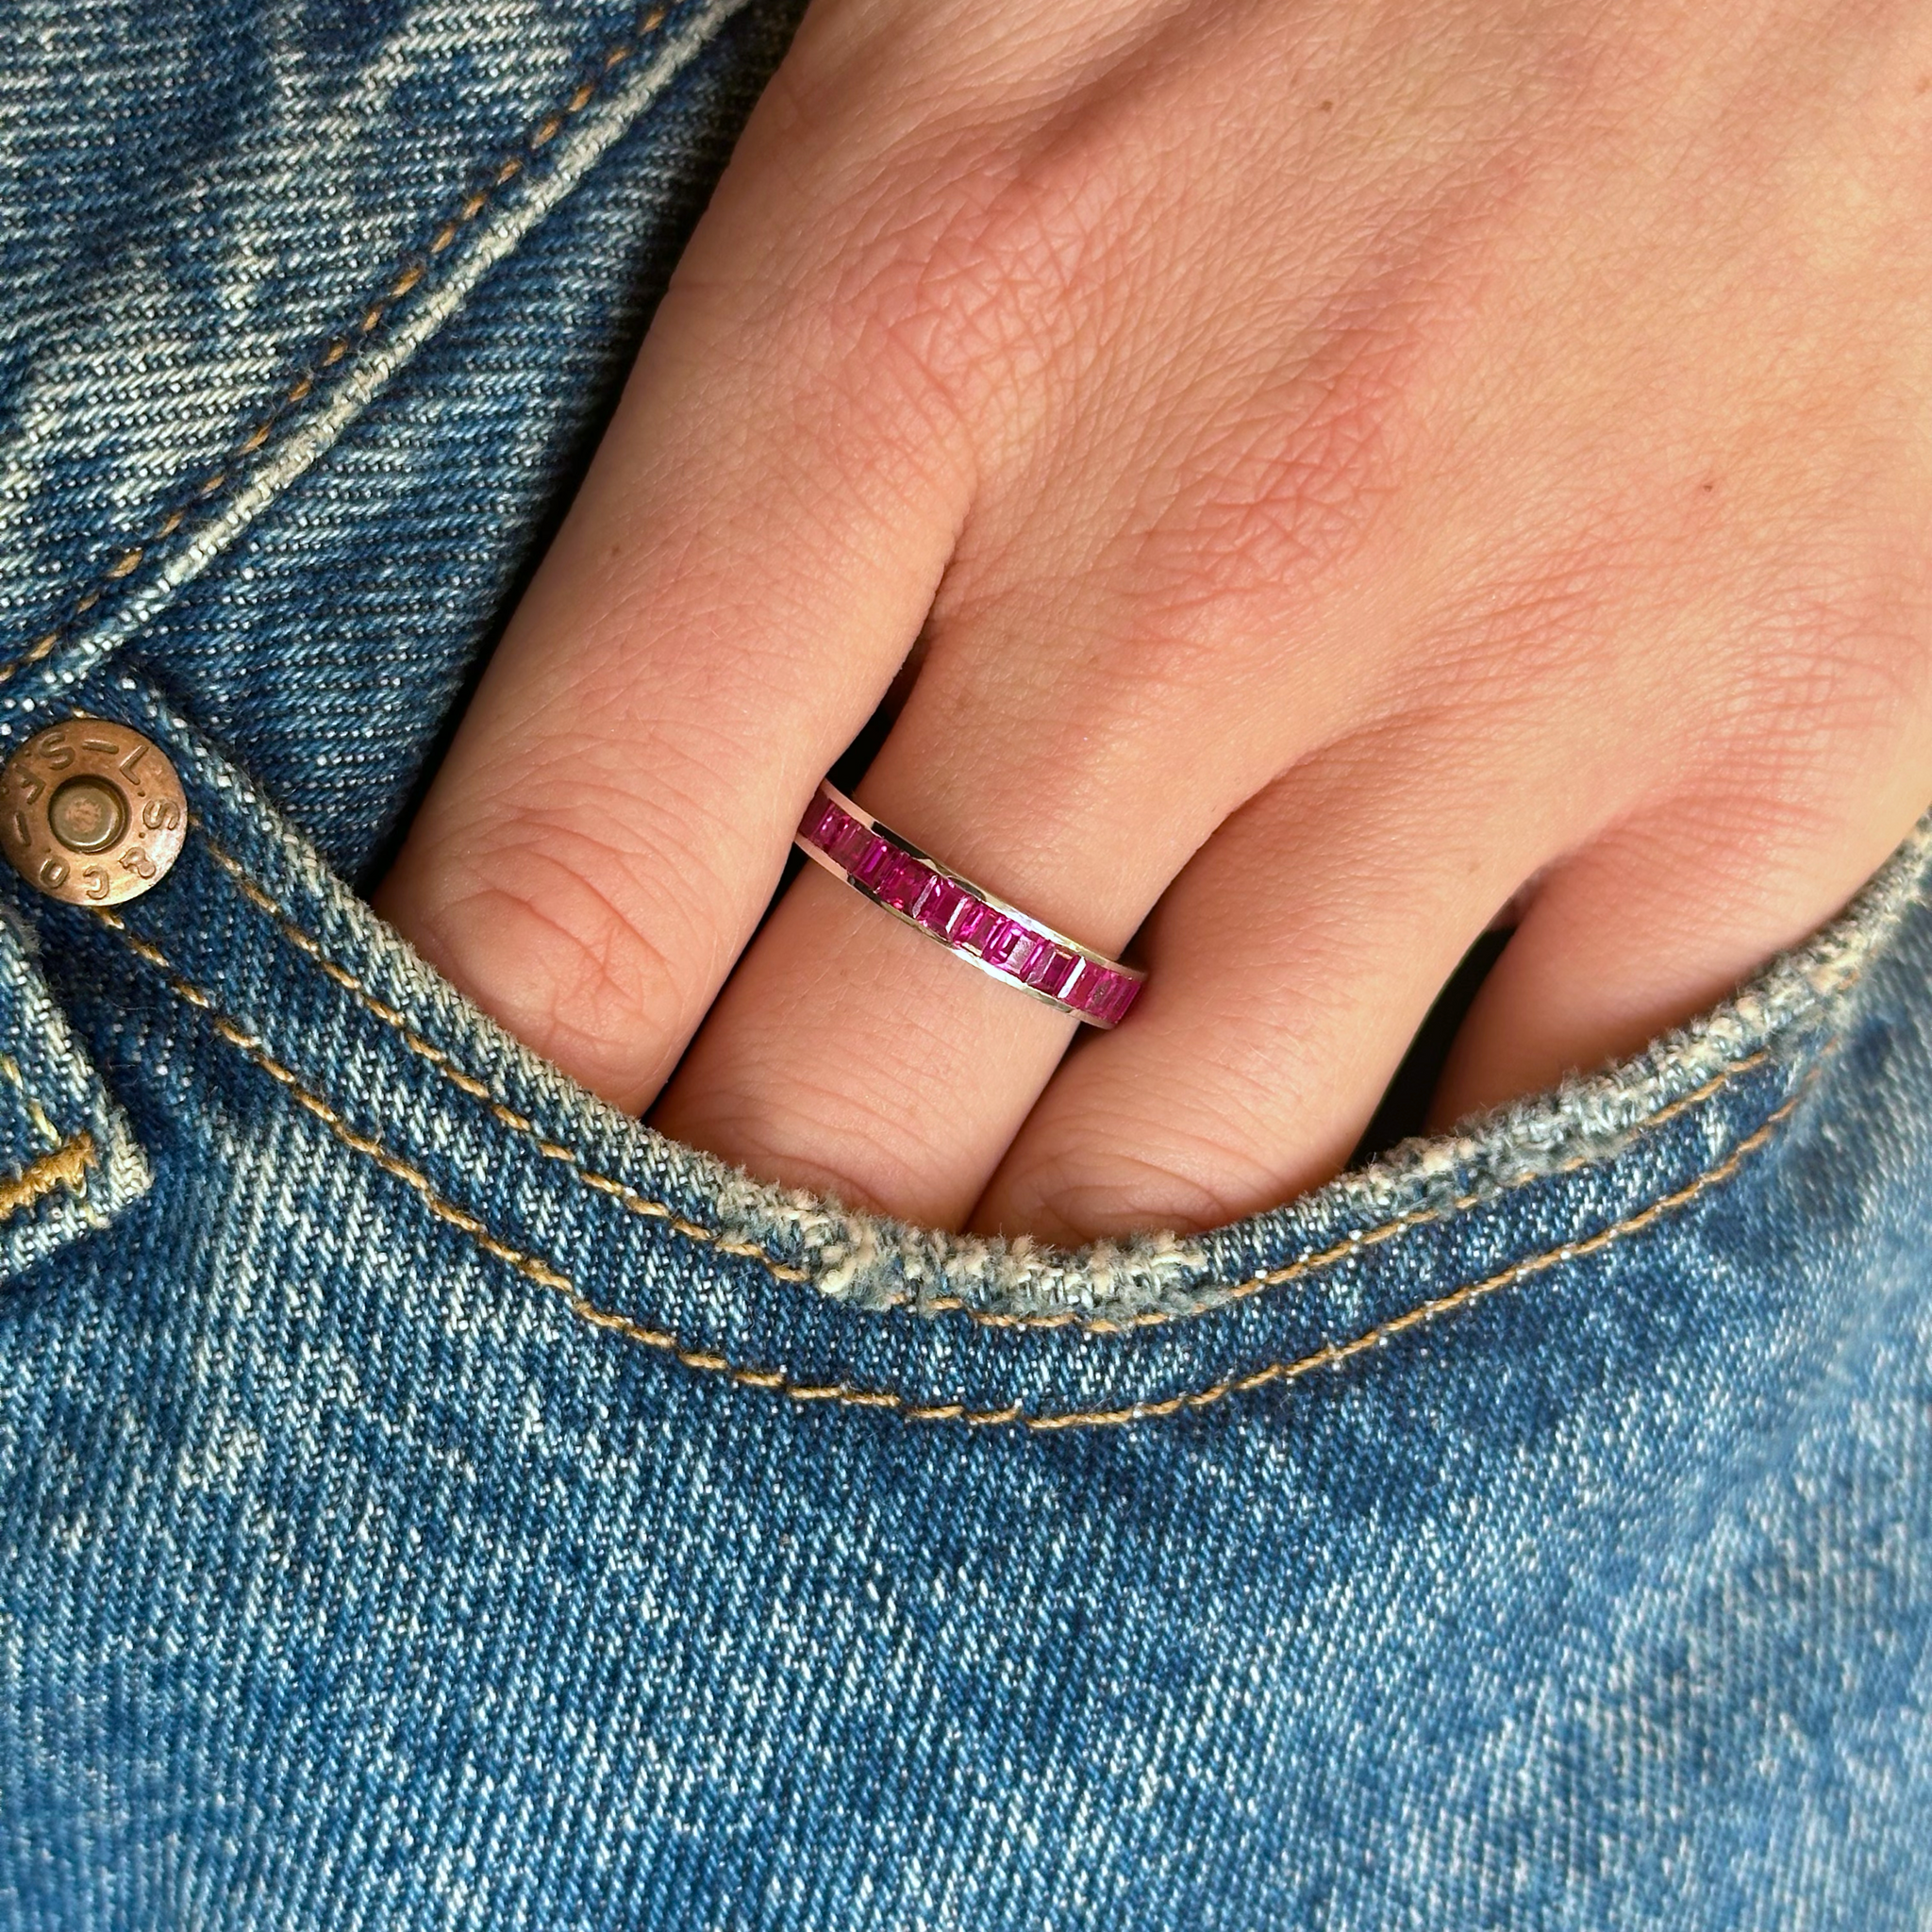 Ruby eternity ring worn on hand in pocket of jeans